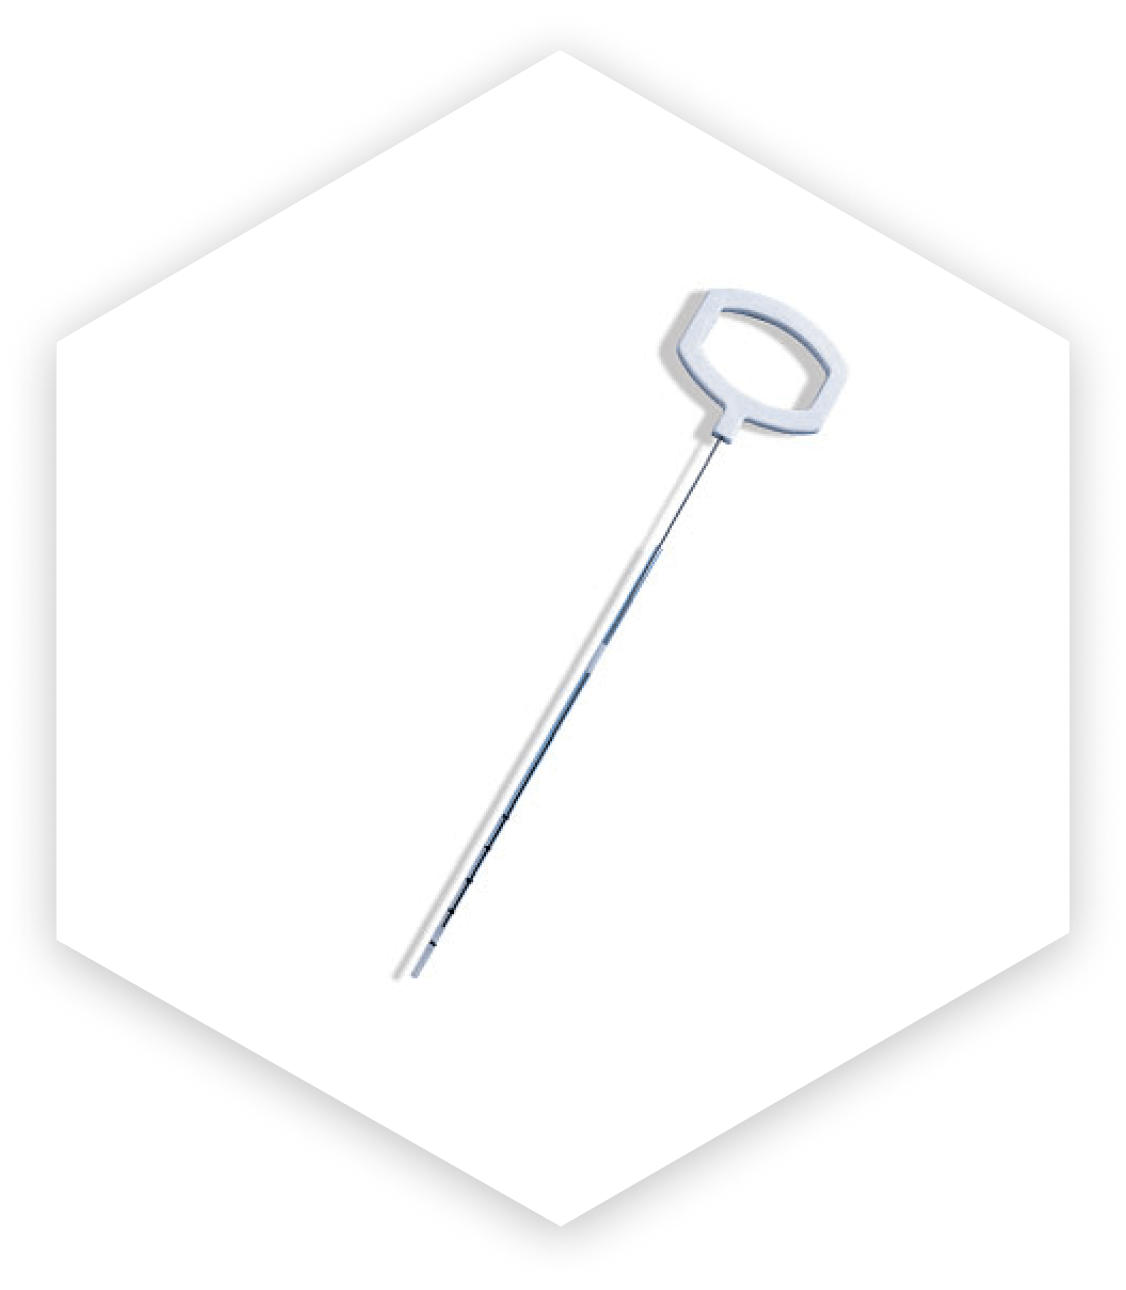 Drummond 5 /µl PCR Pipet 100 Glass Micropipets//100 Plungers